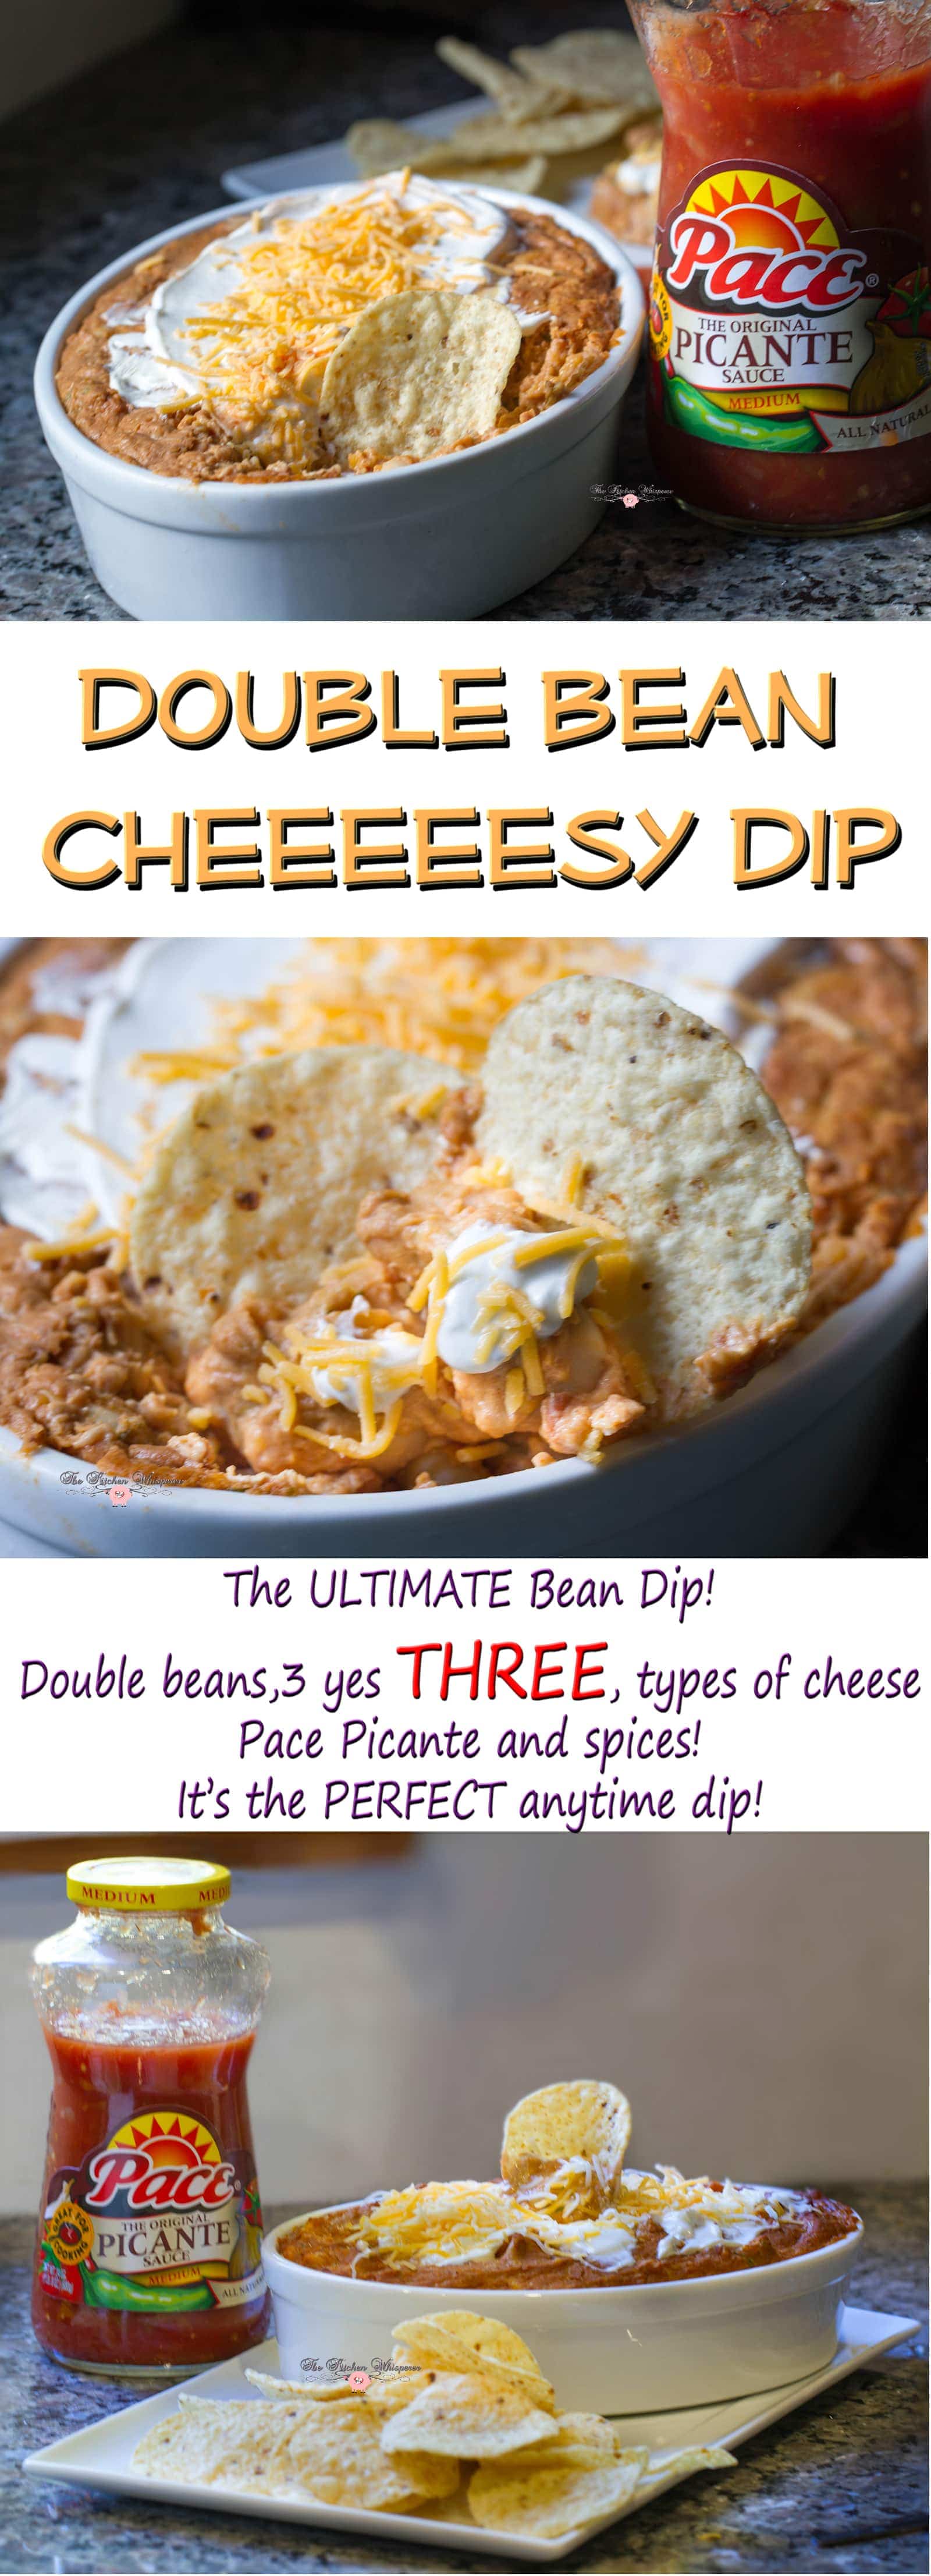 double-bean-cheeesy-dip-collage1